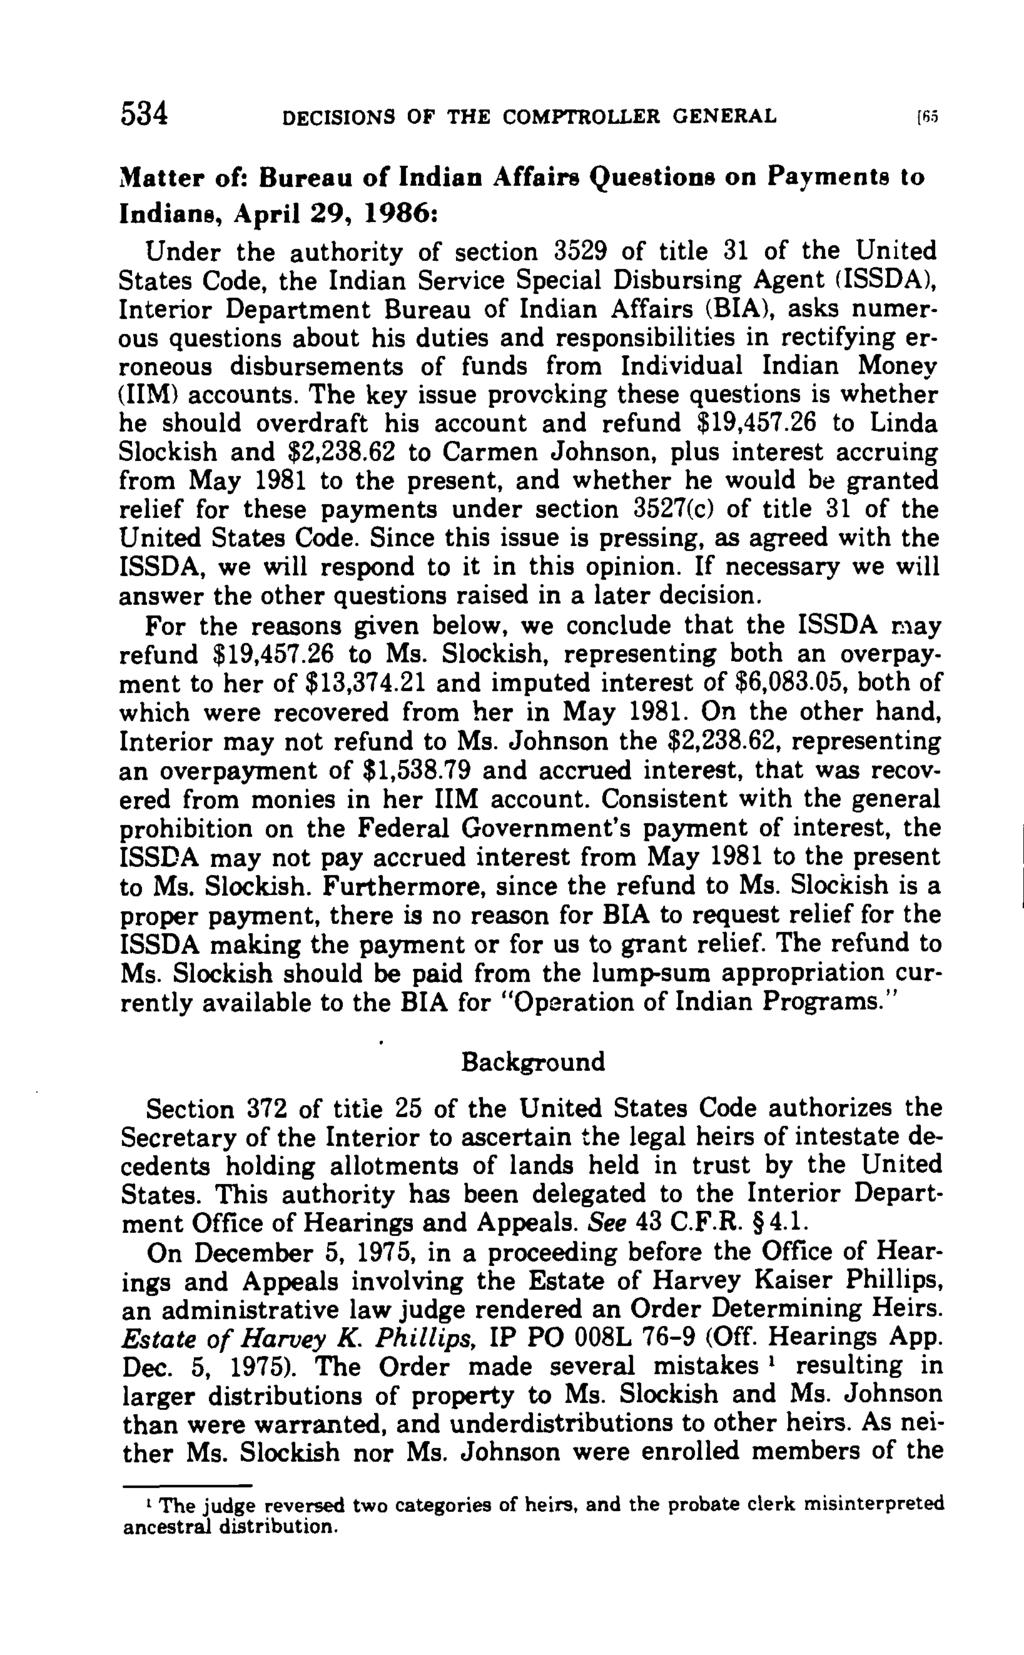 534 DECISIONS OF THE COMPTROLLER GENERAL [5 Matter of: Bureau of Indian Affairs Questions on Payments to Indians, April 29, 1986: Under the authority of section 3529 of title 31 of the United States